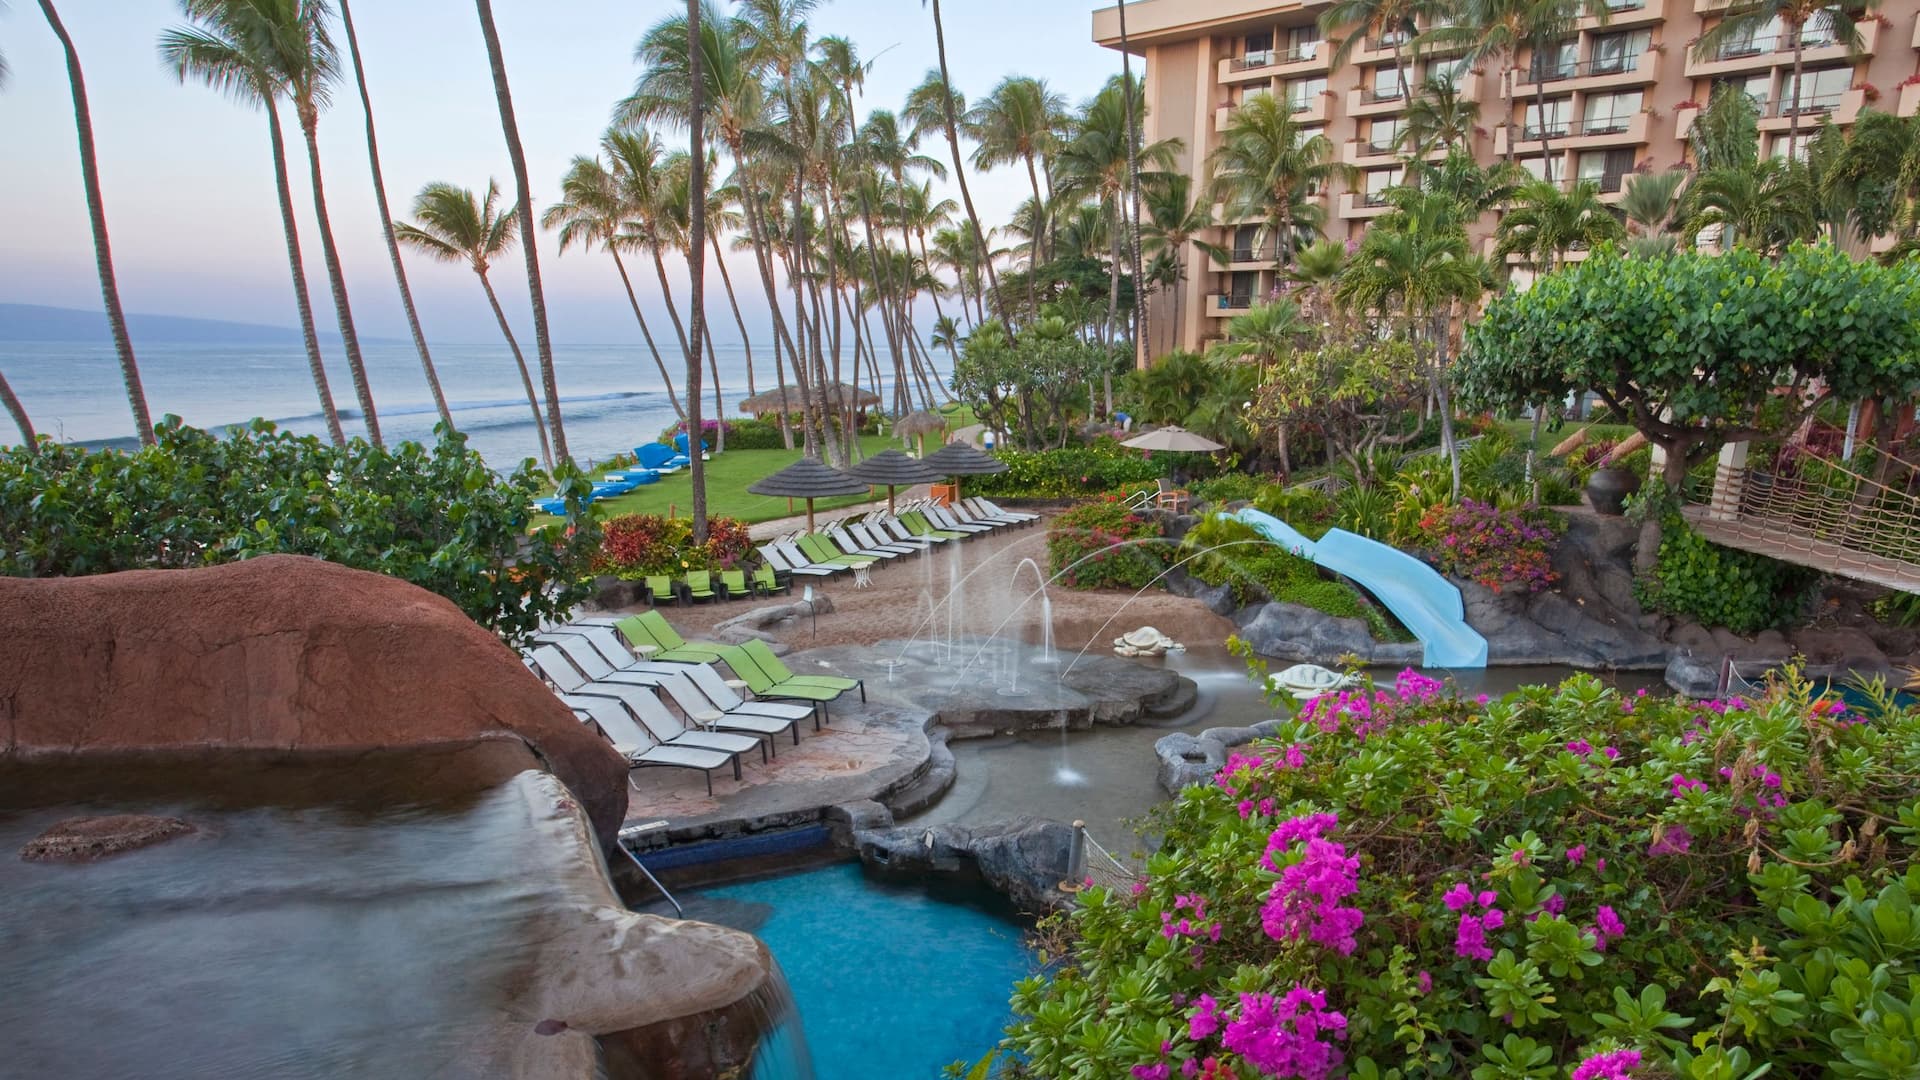 Lagoon surrounded by lush tropical plants at Hyatt Regency Maui Resort and Spa